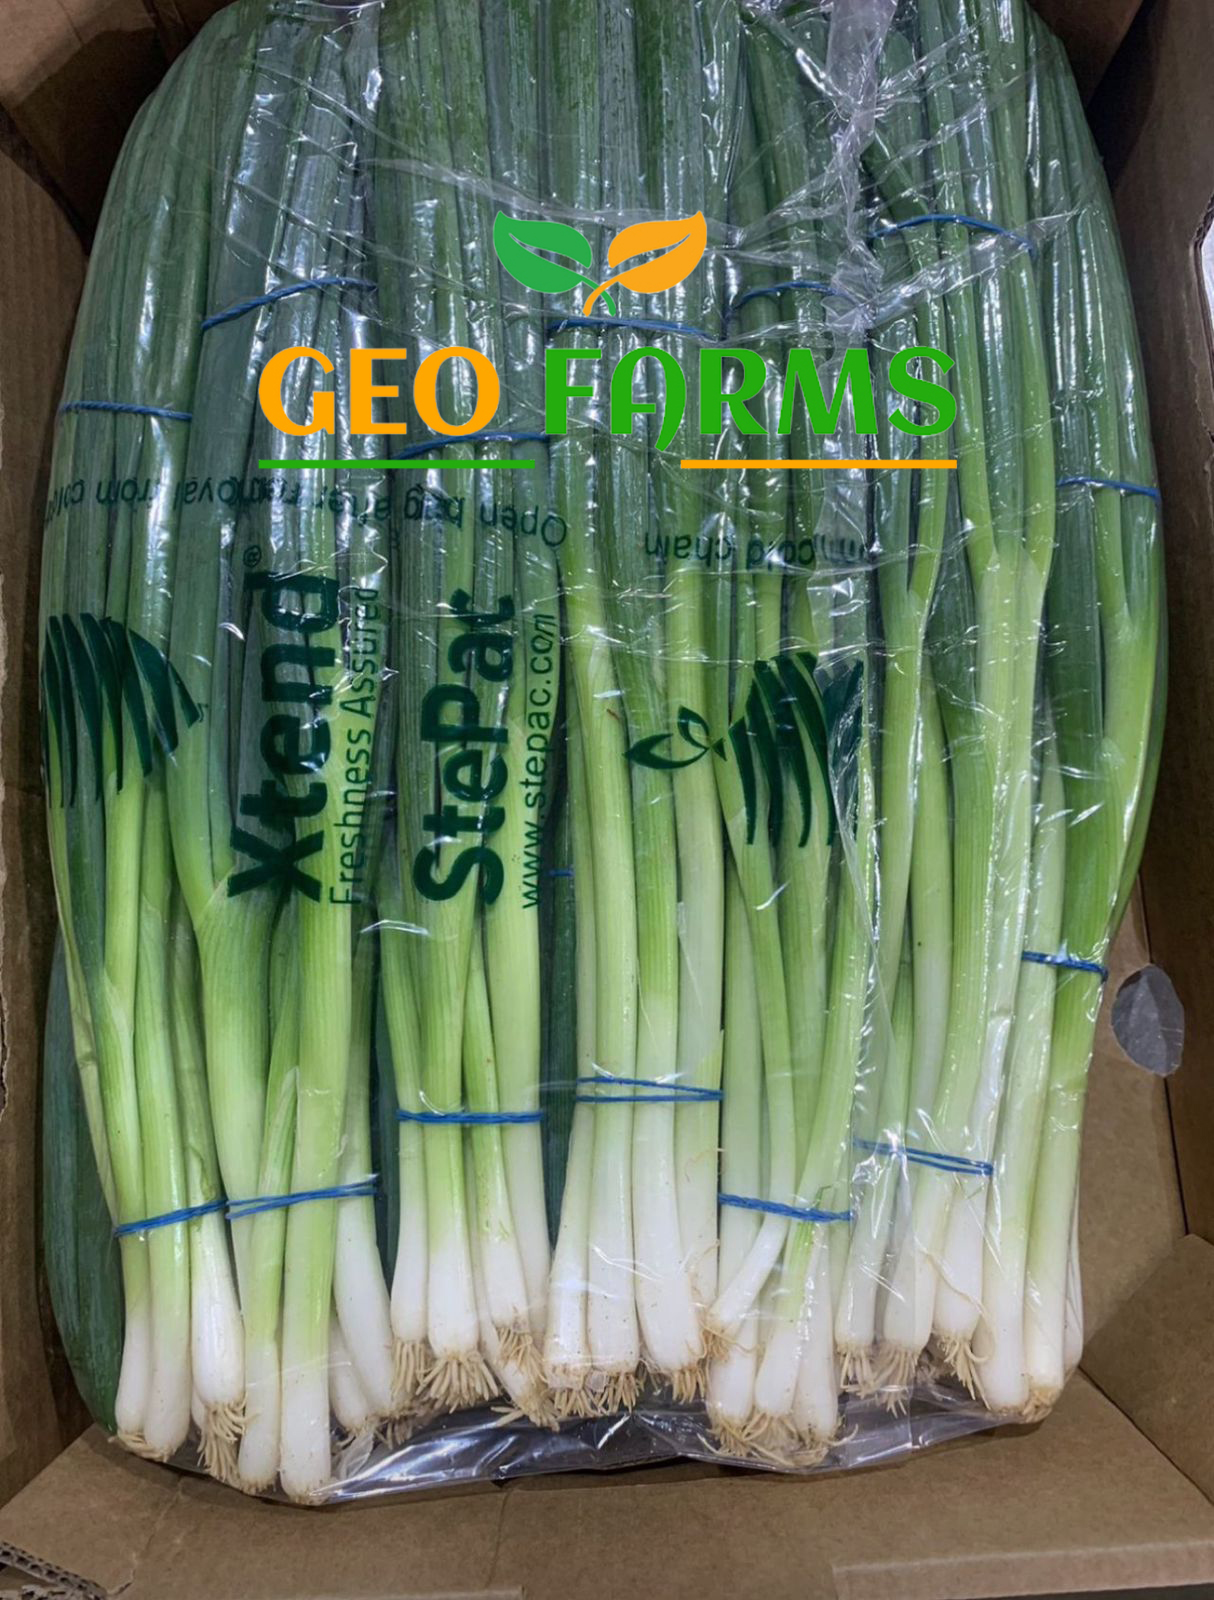 Photon Spring Onion from Egypt